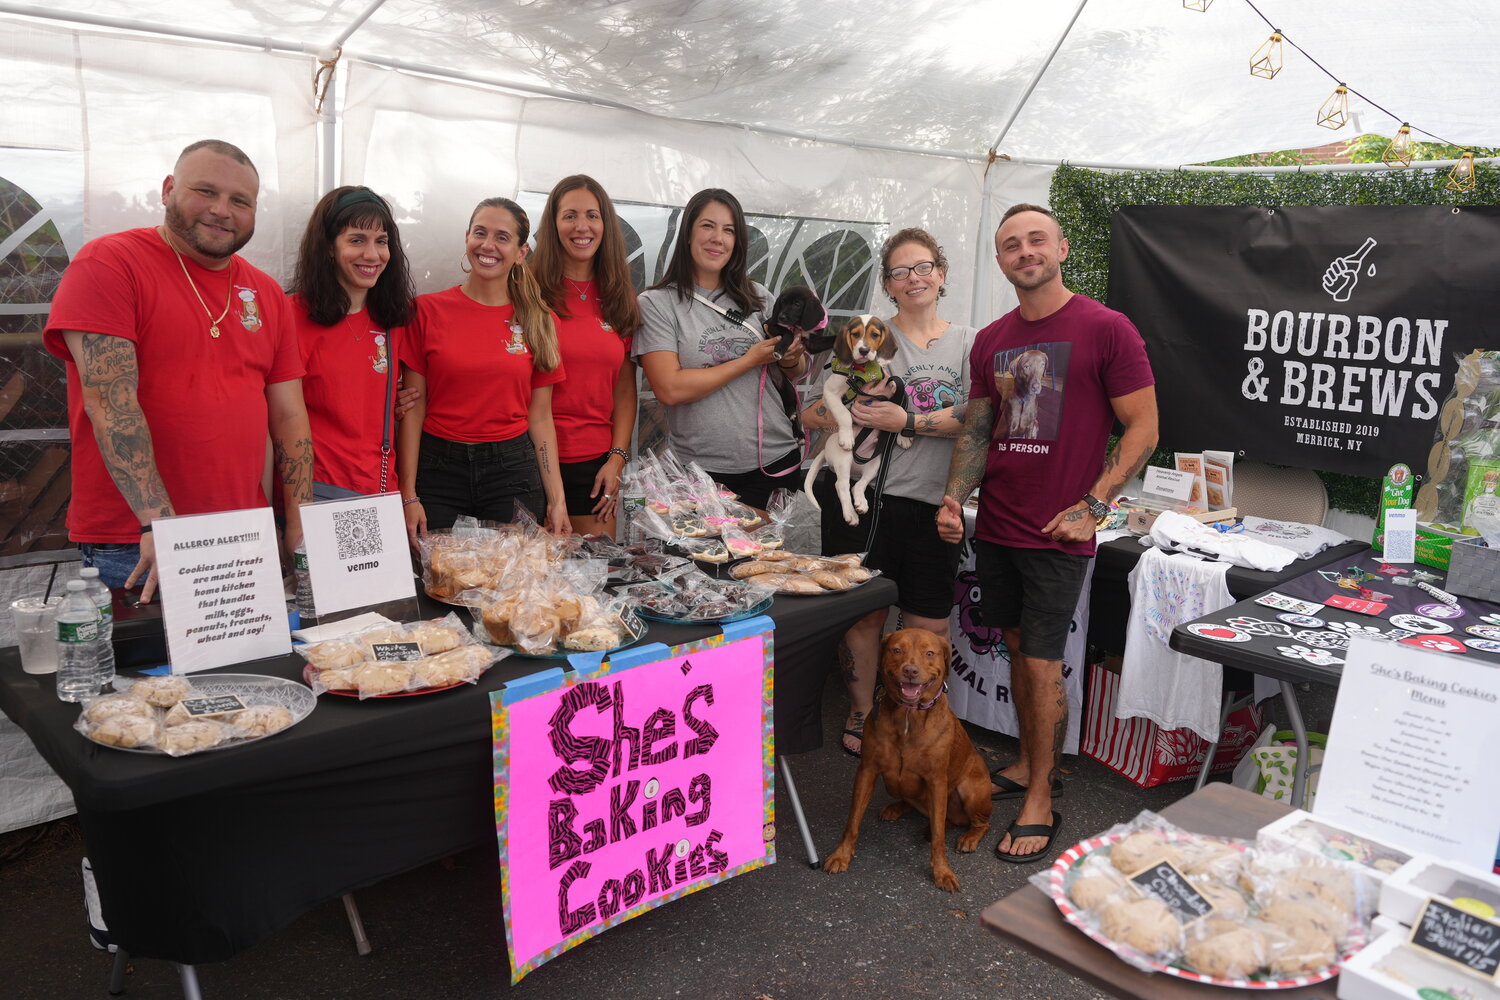 John Amaruso, owner of Bourbon & Brews, far right, with She’s Baking Cookies and volunteers from Heavenly Angels Animal Rescue.